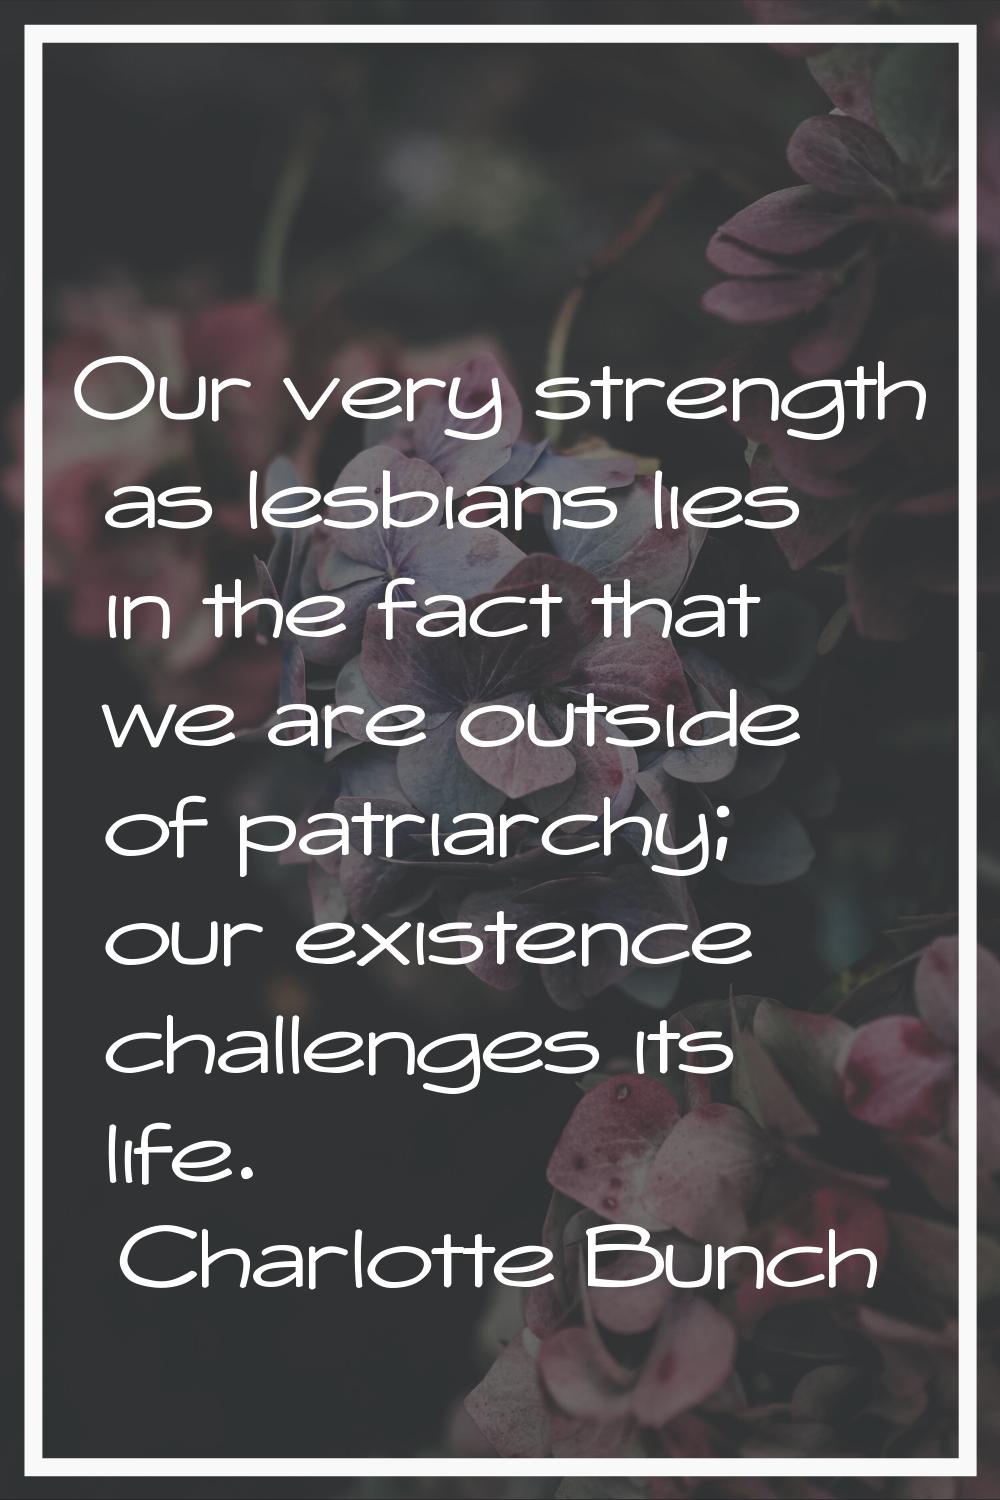 Our very strength as lesbians lies in the fact that we are outside of patriarchy; our existence cha